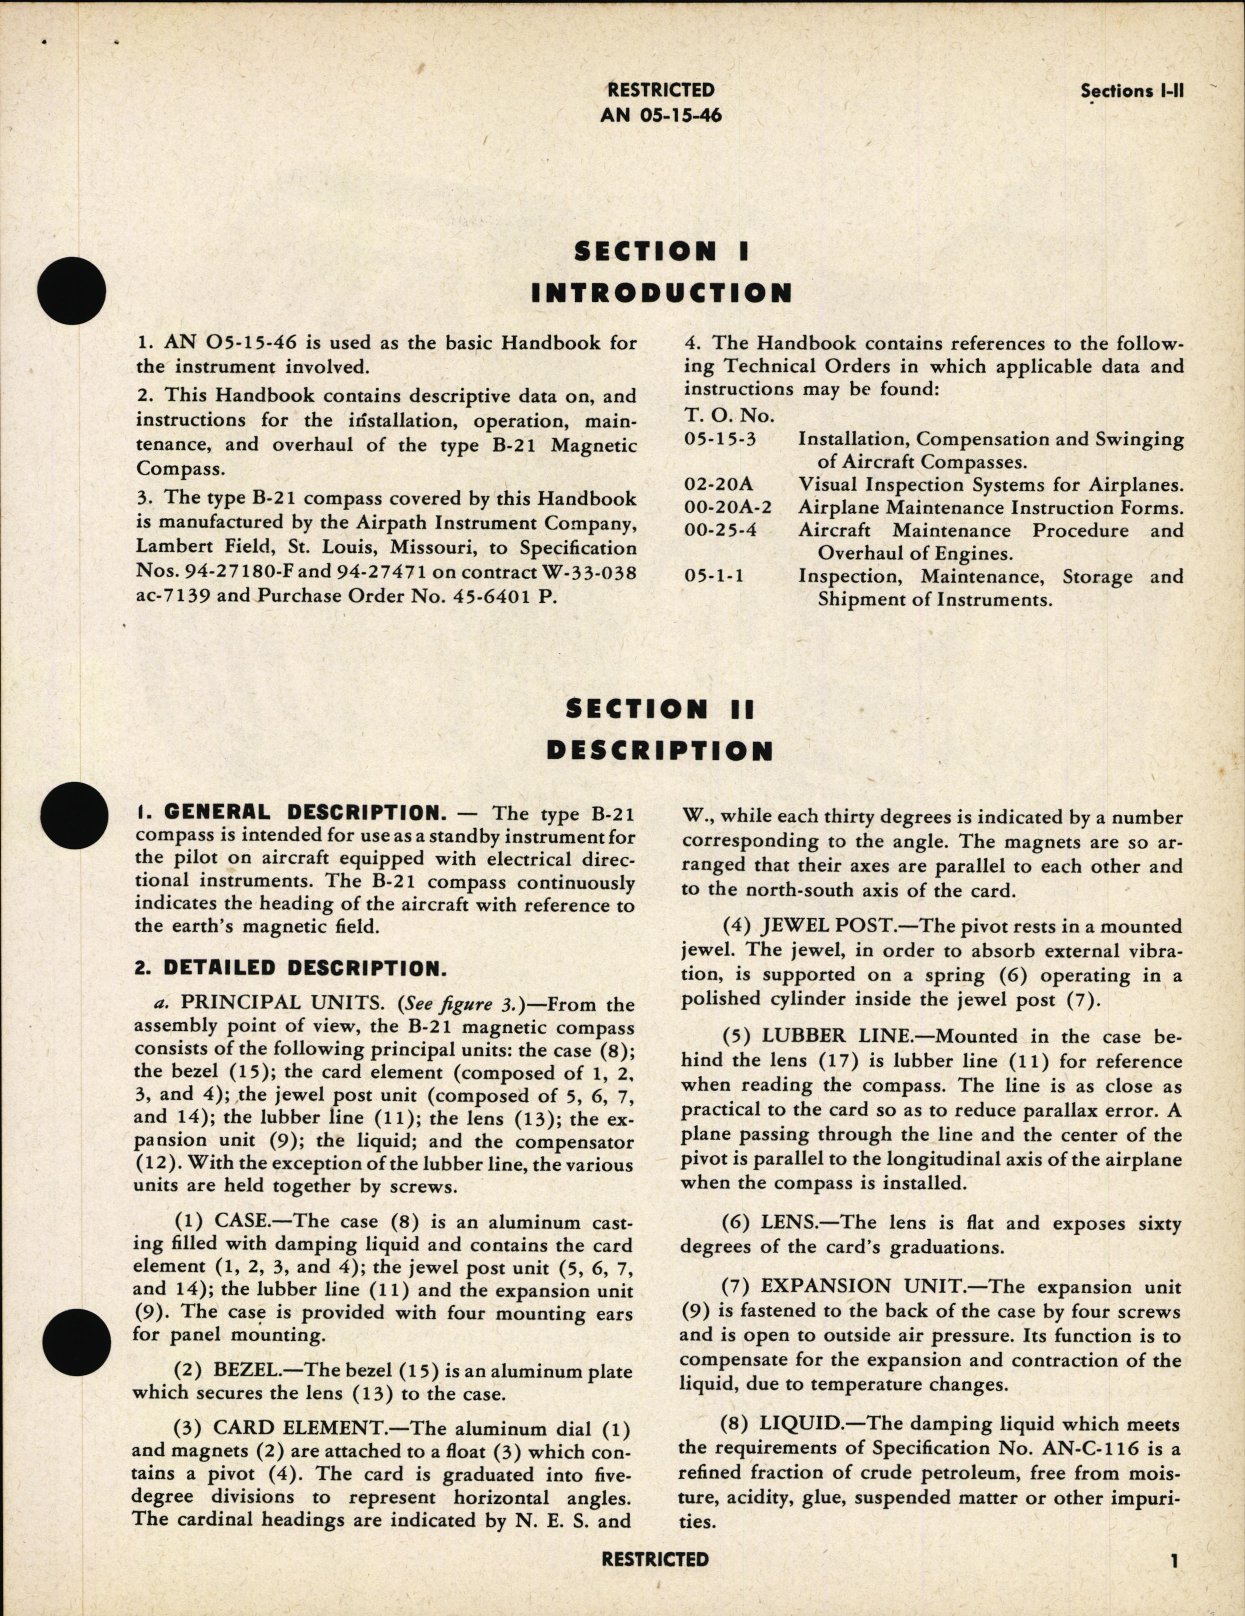 Sample page 5 from AirCorps Library document: Handbook of Instructions with Parts Catalog for Magnetic Compass Type B-21